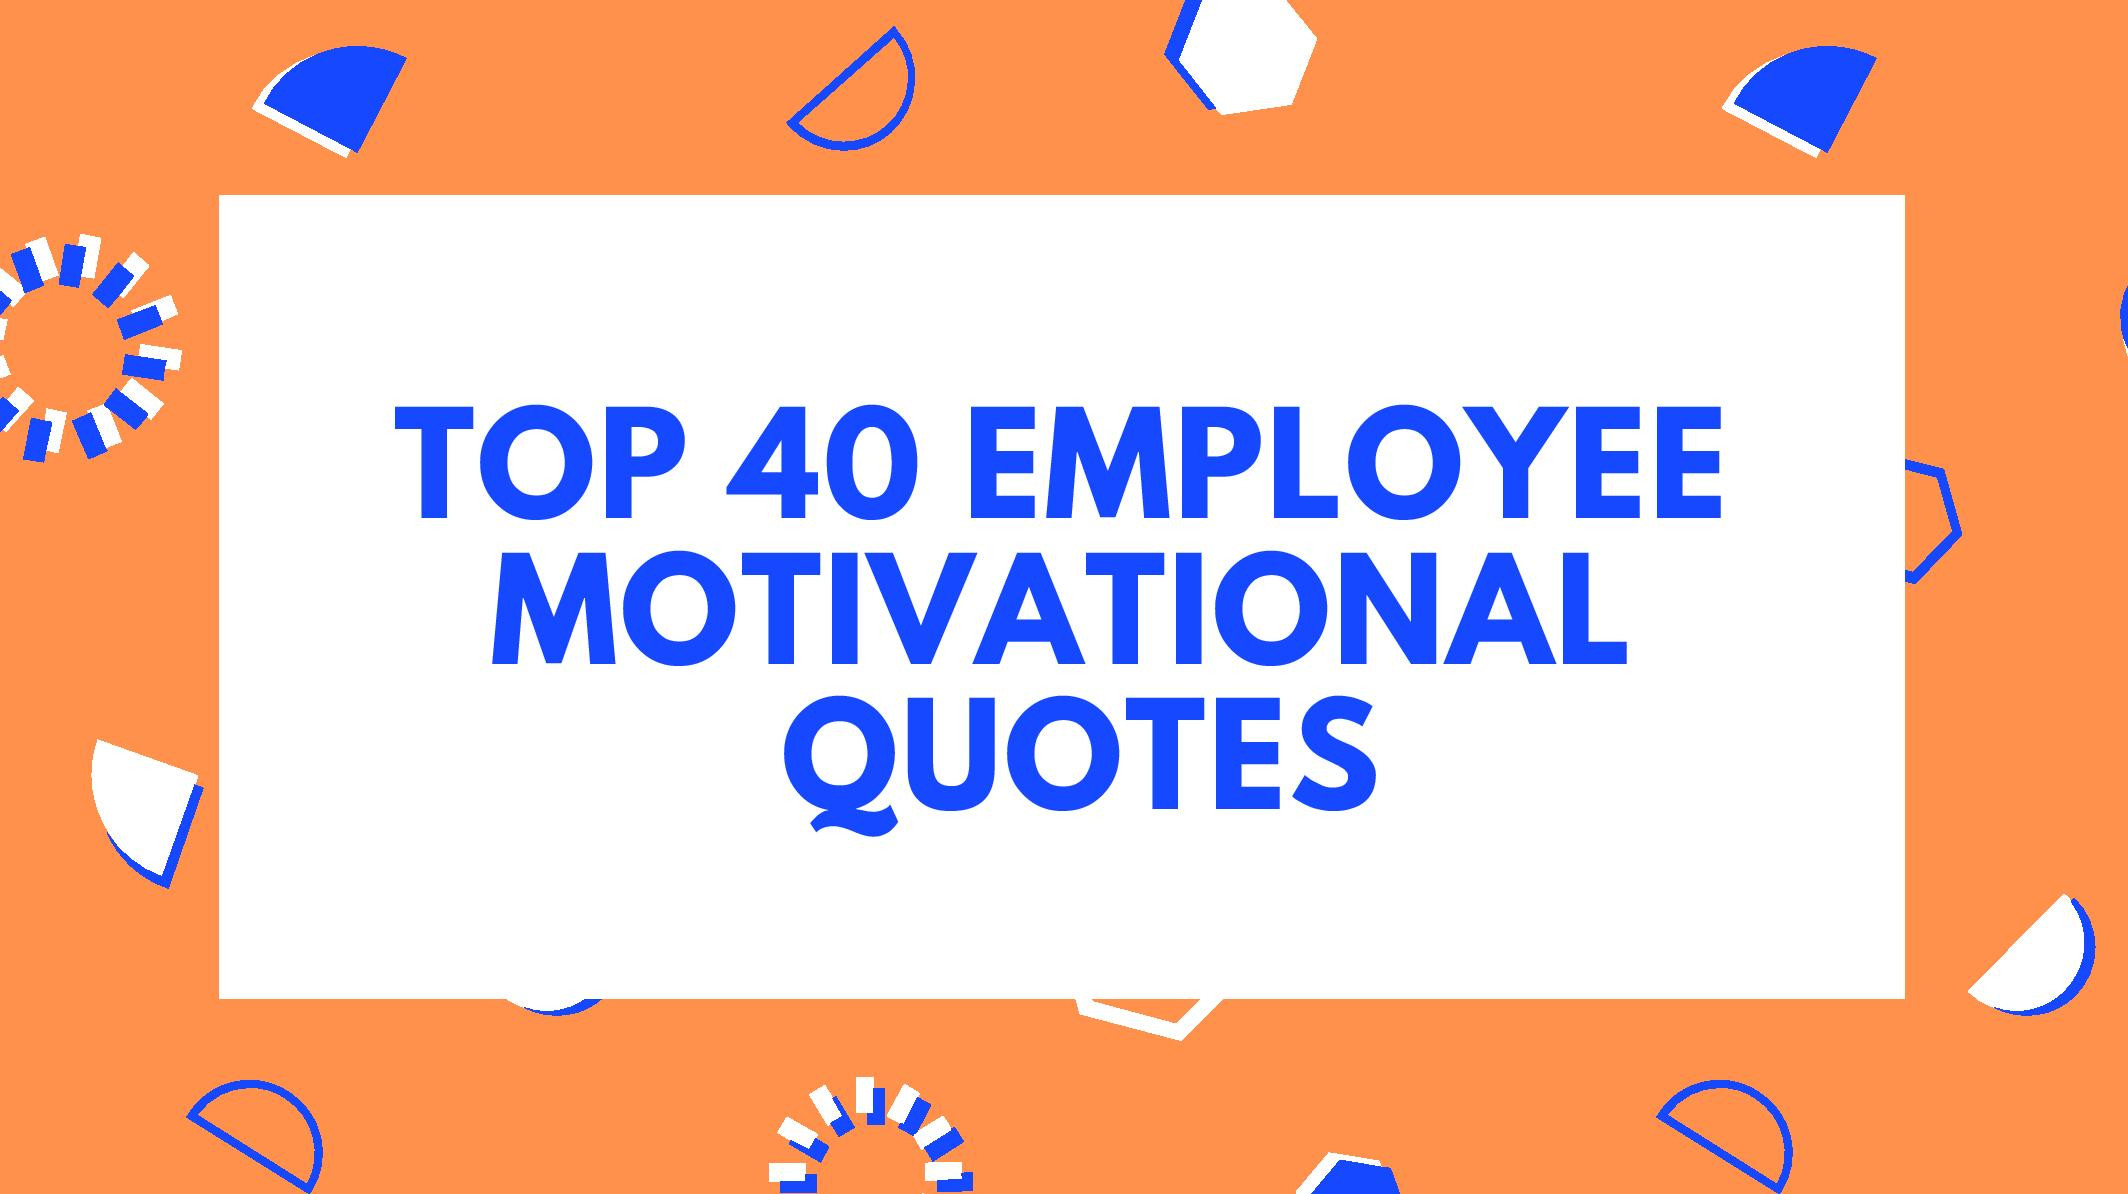 Motivational Quotes For Employees From Managers
 Top 40 Employee Motivational Quotes To Inspire Your Workforce